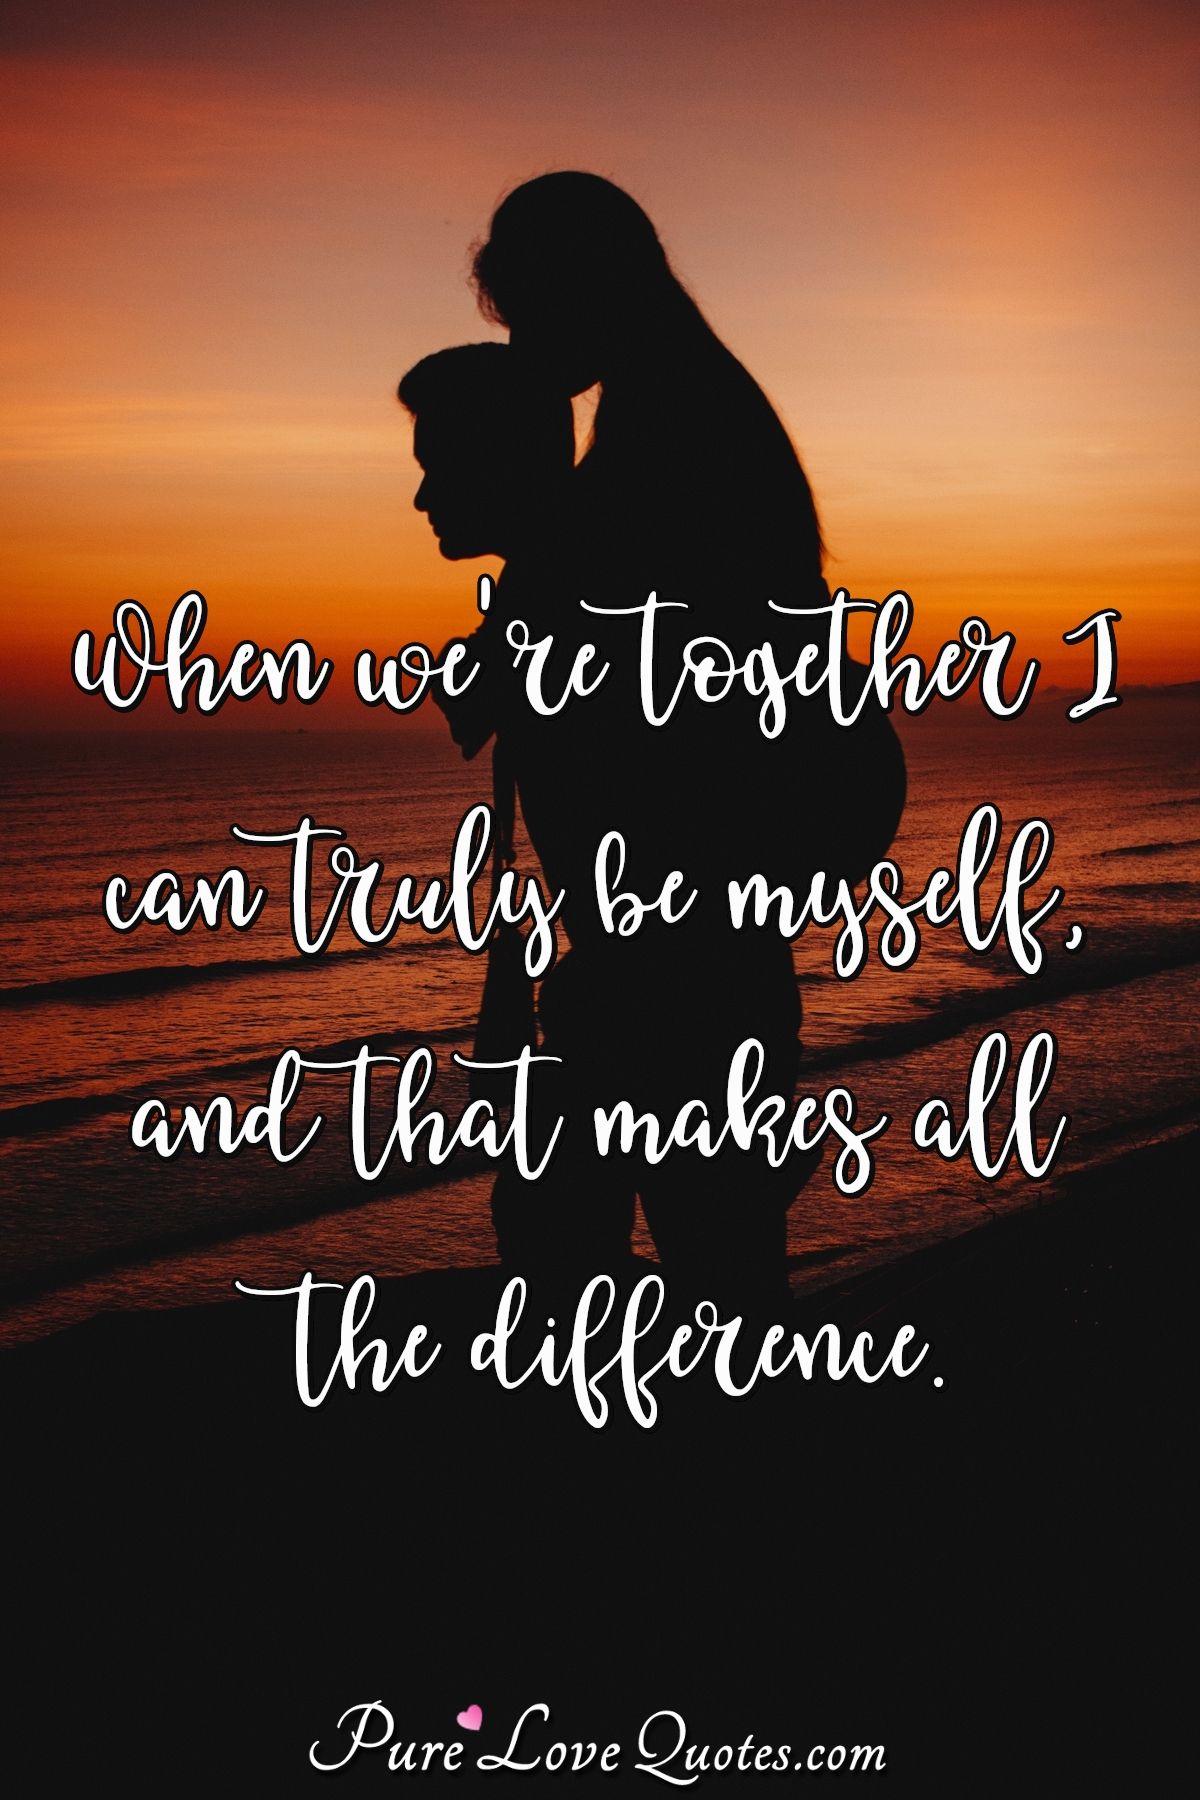 When we're together I can truly be myself, and that makes all the difference. - PureLoveQuotes.com